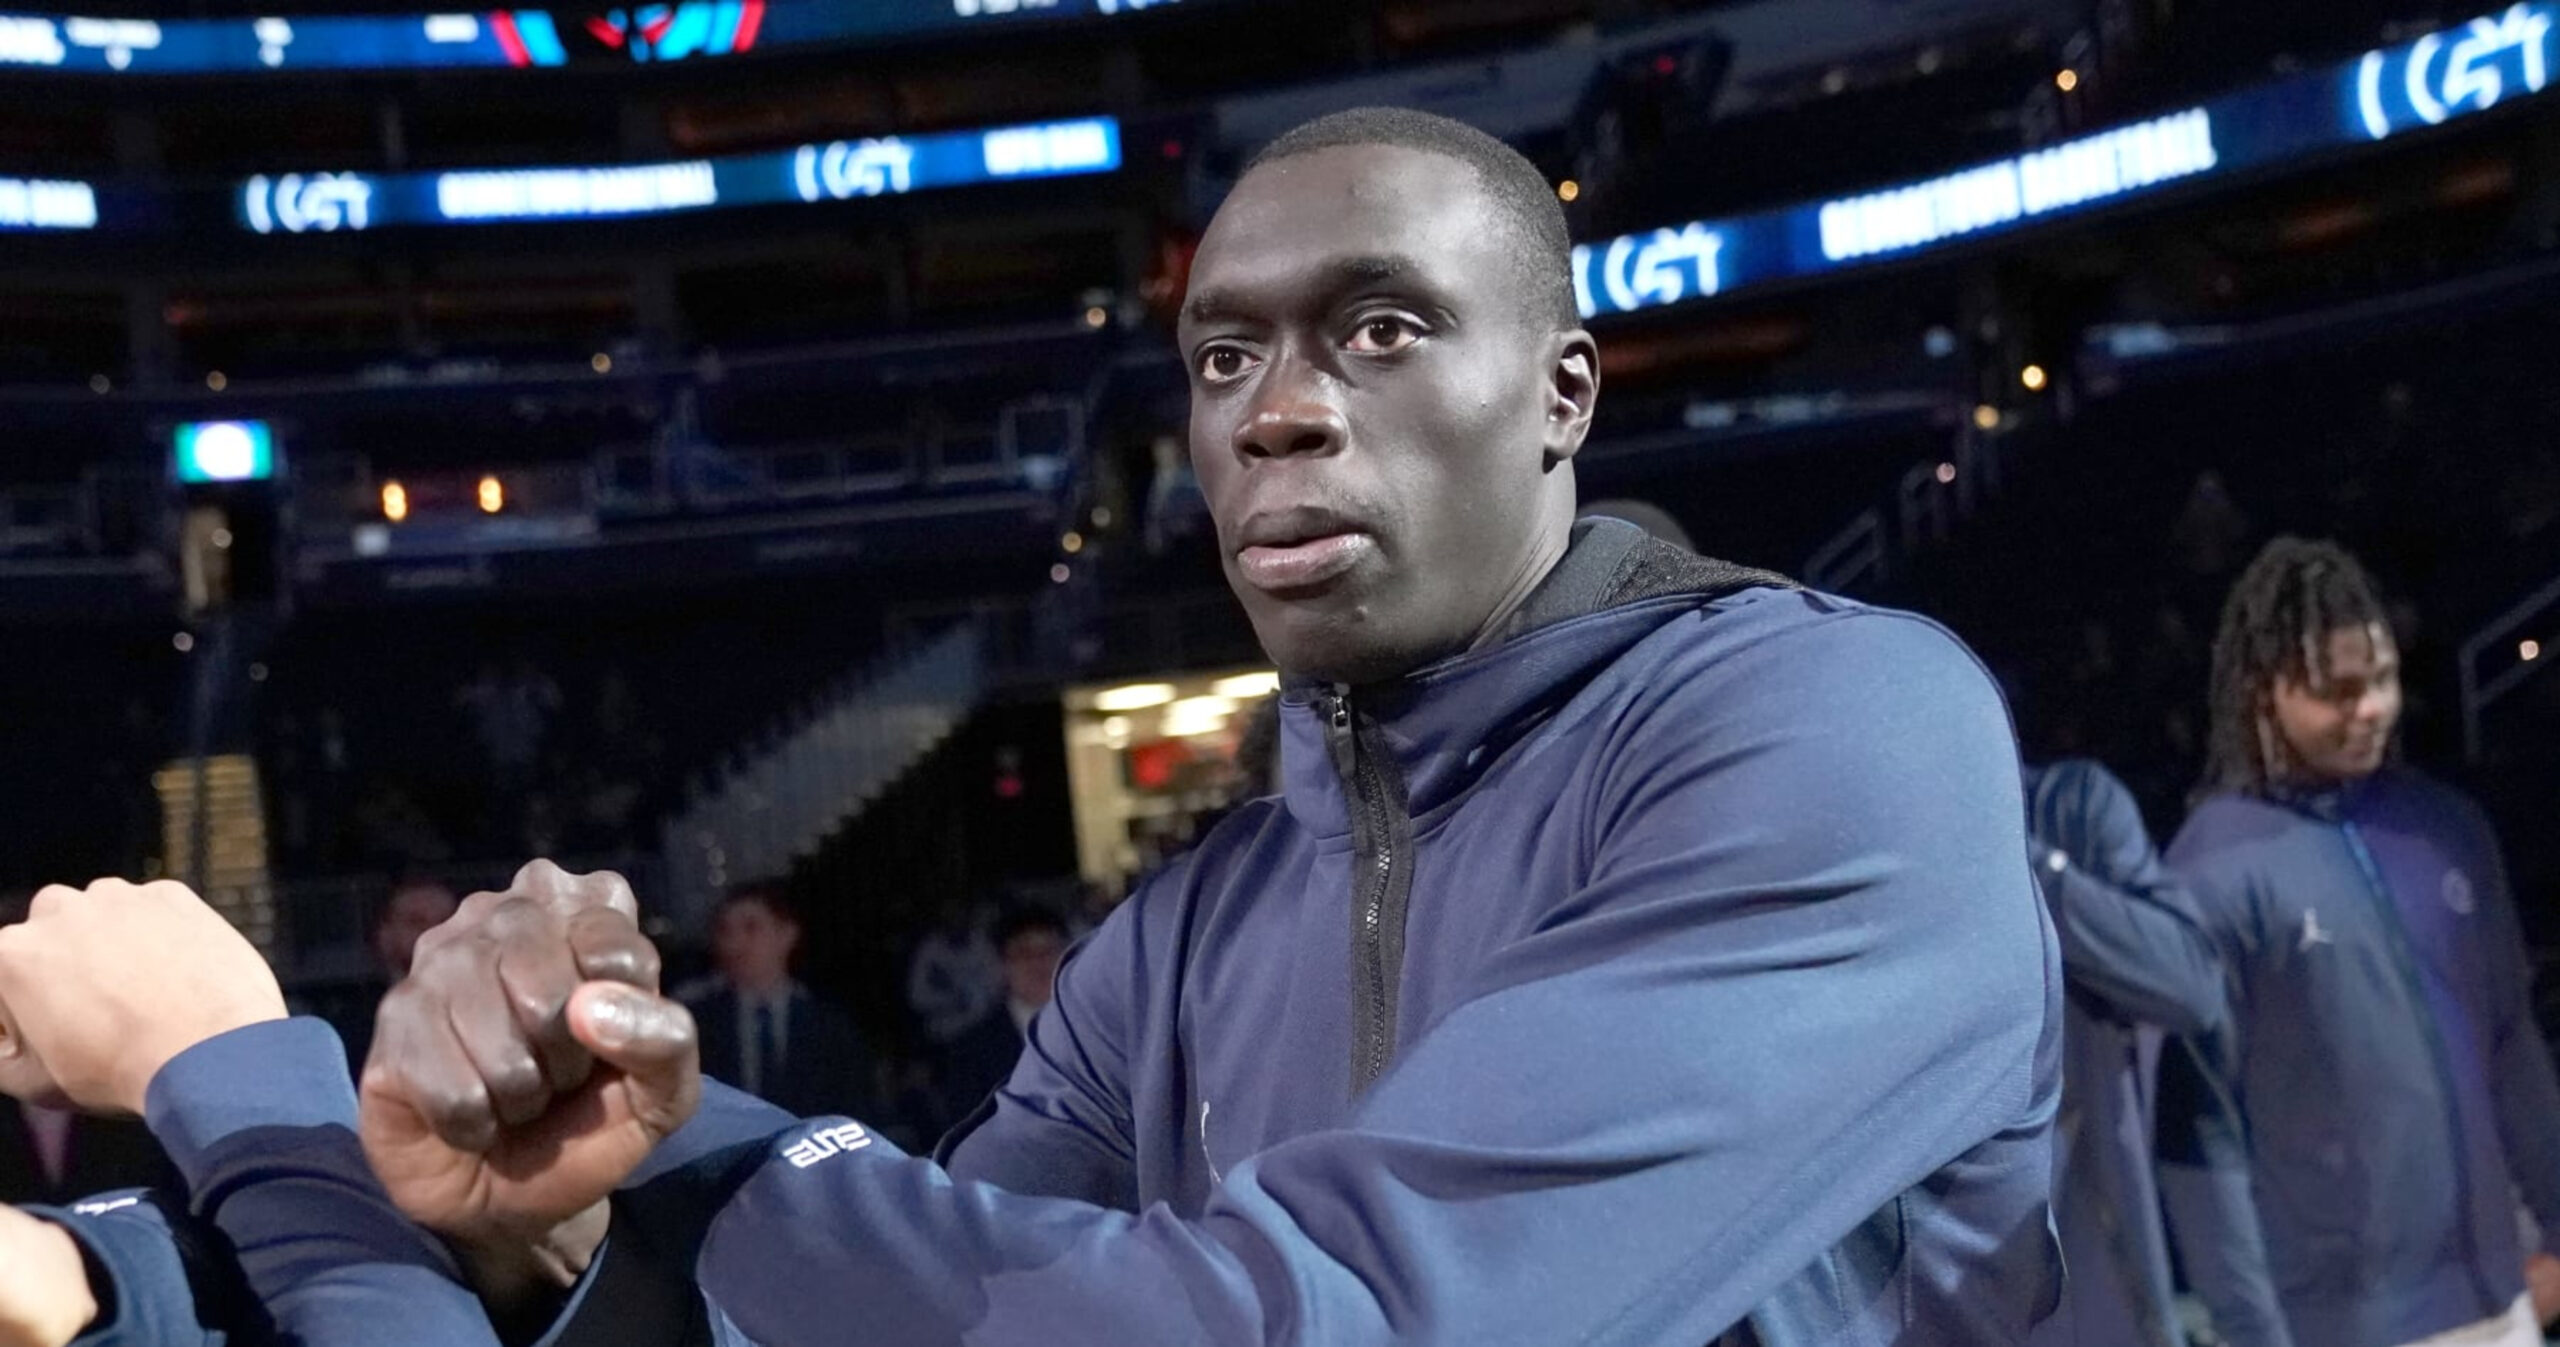 WVU’s Akok Akok in Stable Condition After Collapsing on Court vs. George Mason